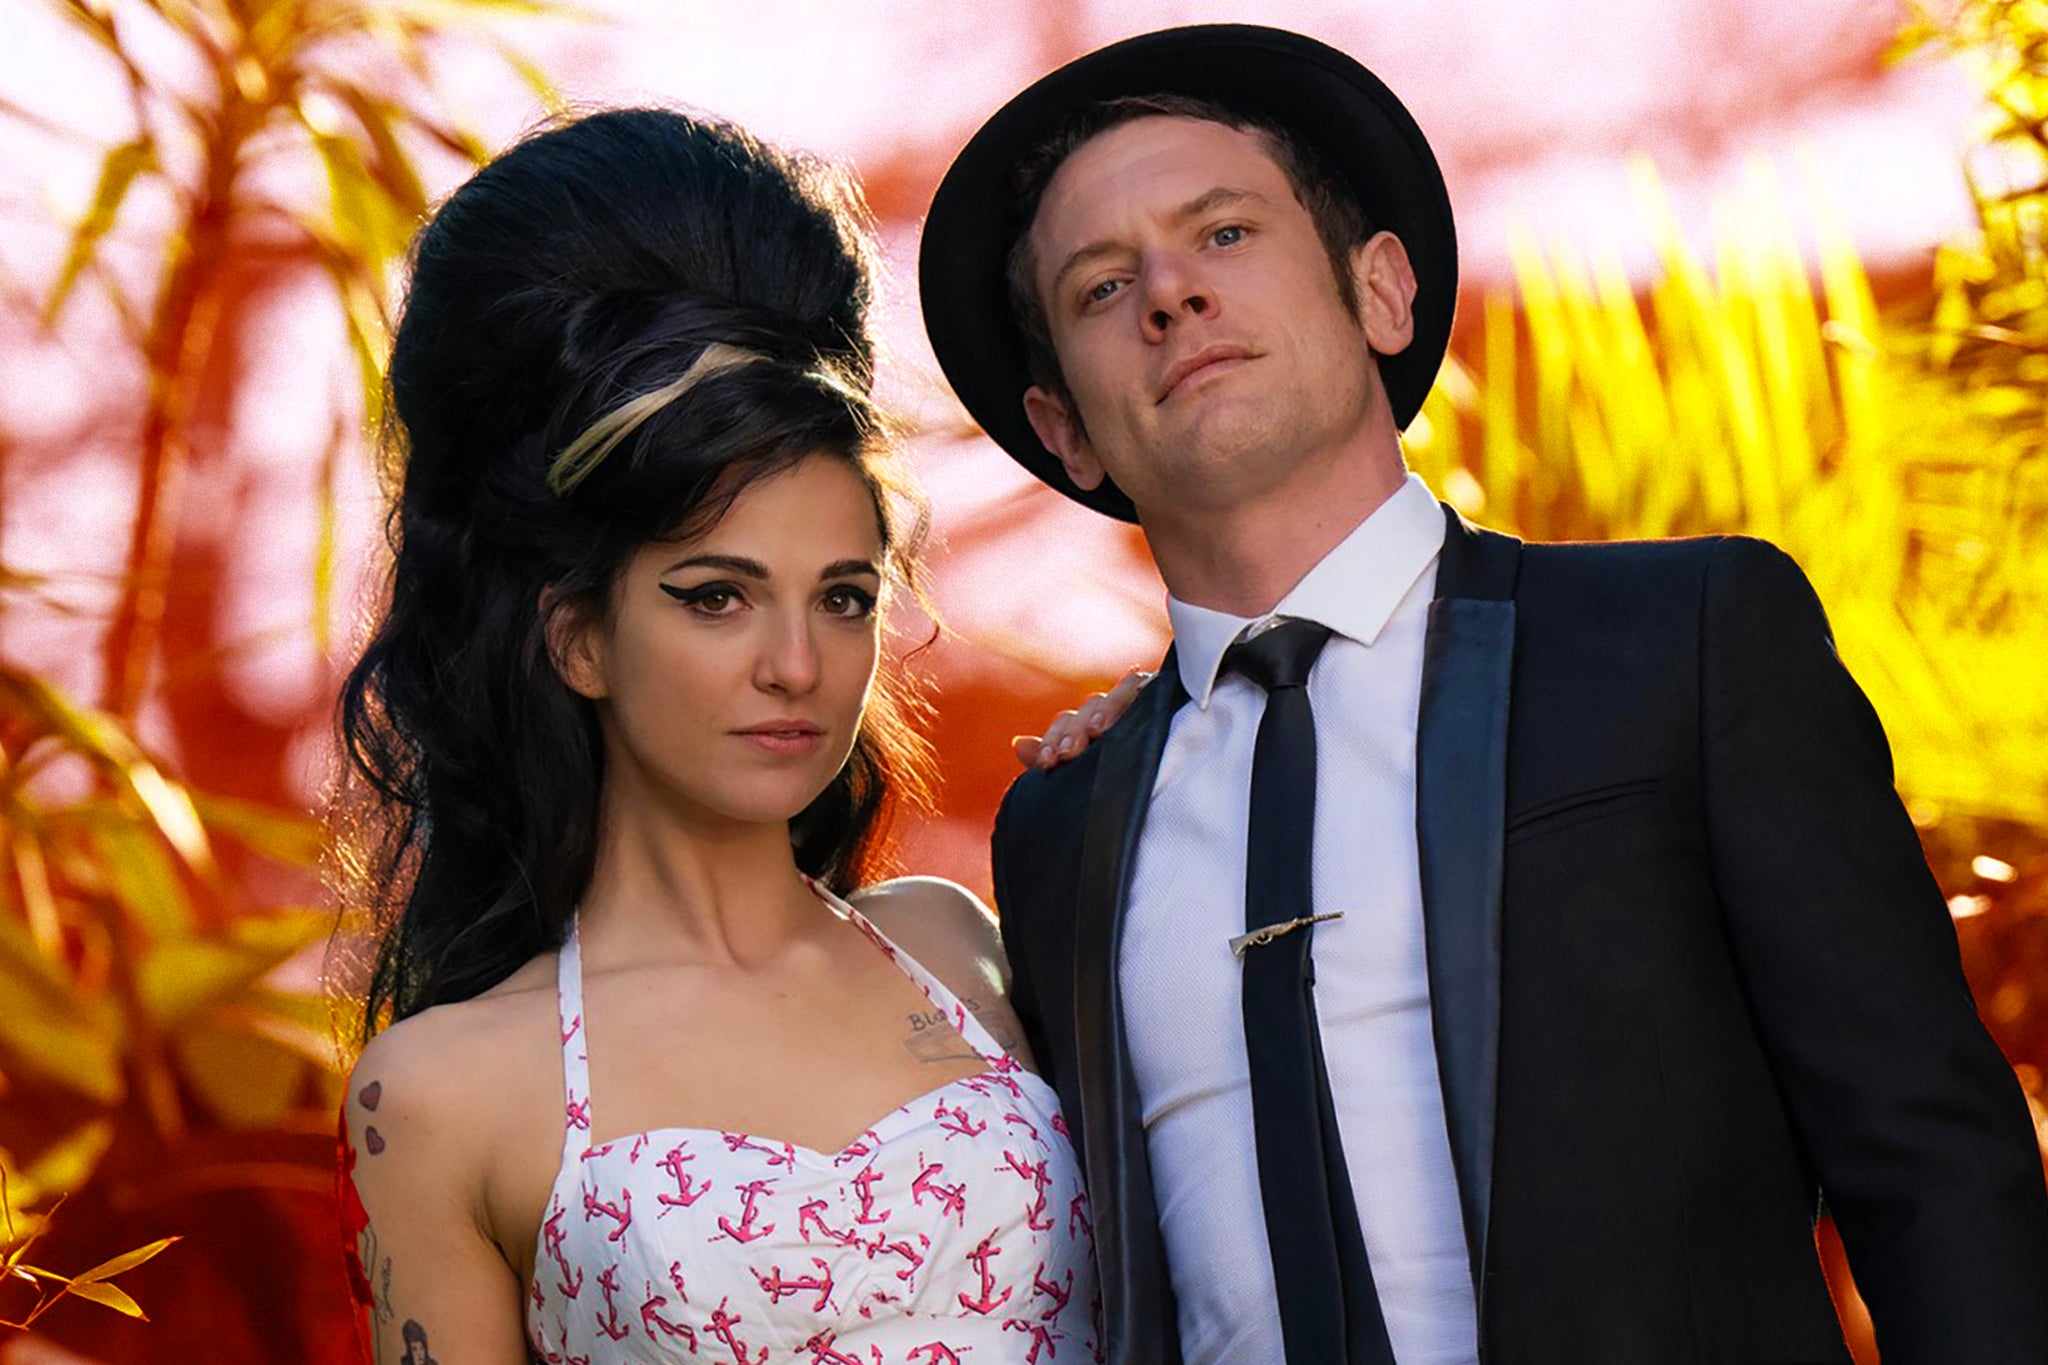 Marisa Abela and Jack O’Connell as Amy Winehouse and Blake Fielder-Civil in ‘Back to Black'